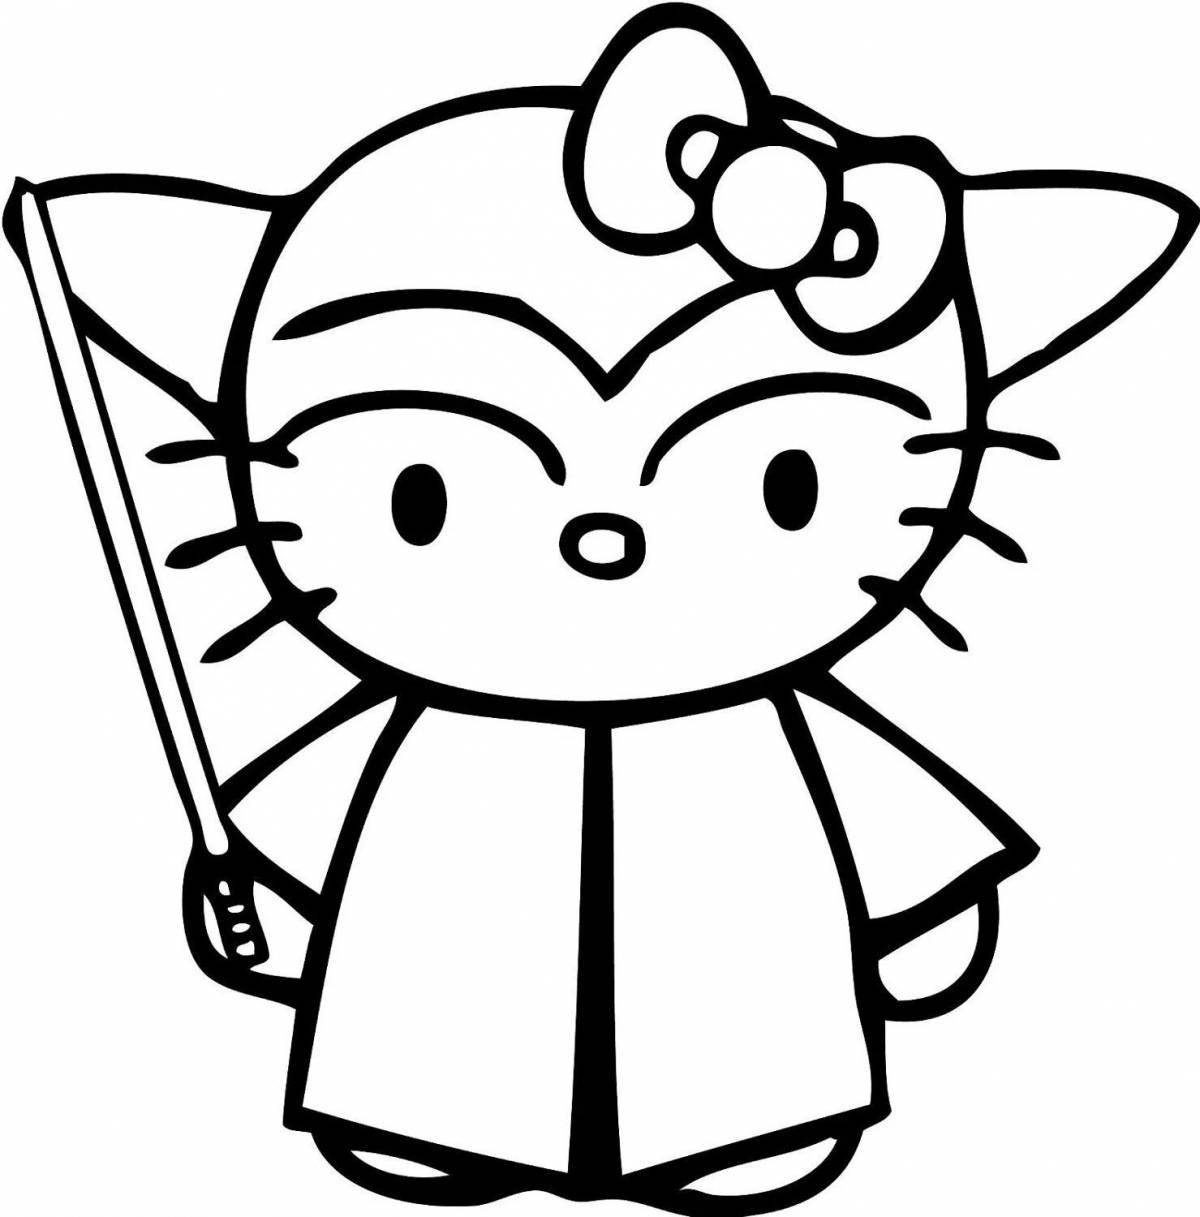 Quirky little hello kitty kuromi coloring page